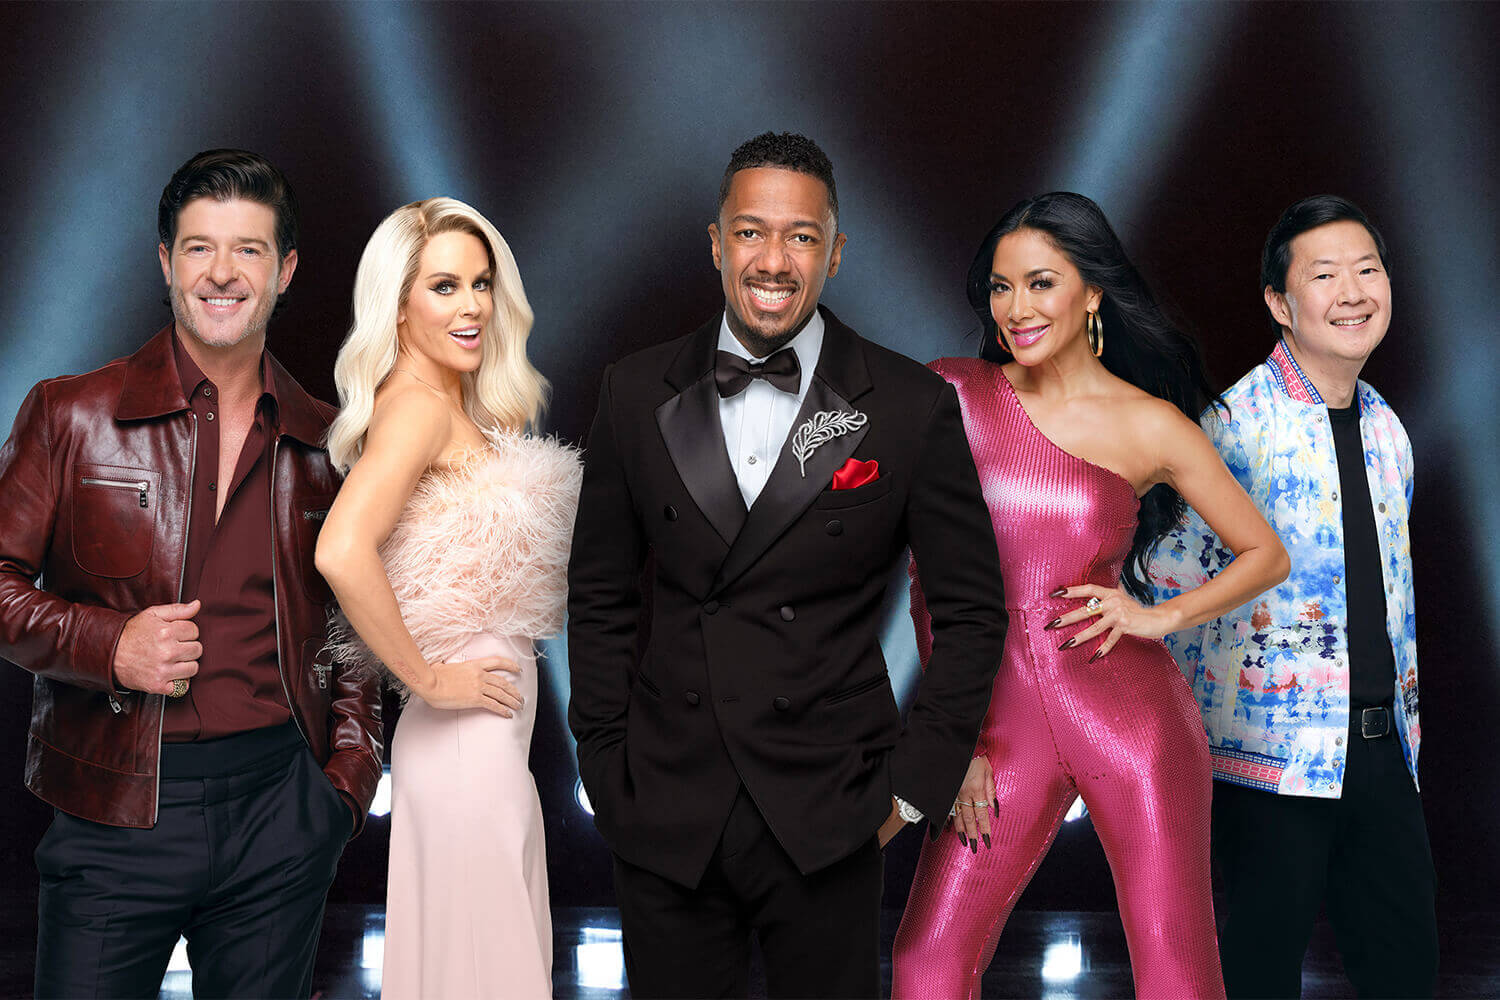 The Masked Singer Season 9 returns at its usual time with its usual team: Robin Thicke, Jenny McCarthy Wahlberg, Nick Cannon, Nicole Scherzinger, and Ken Jeong